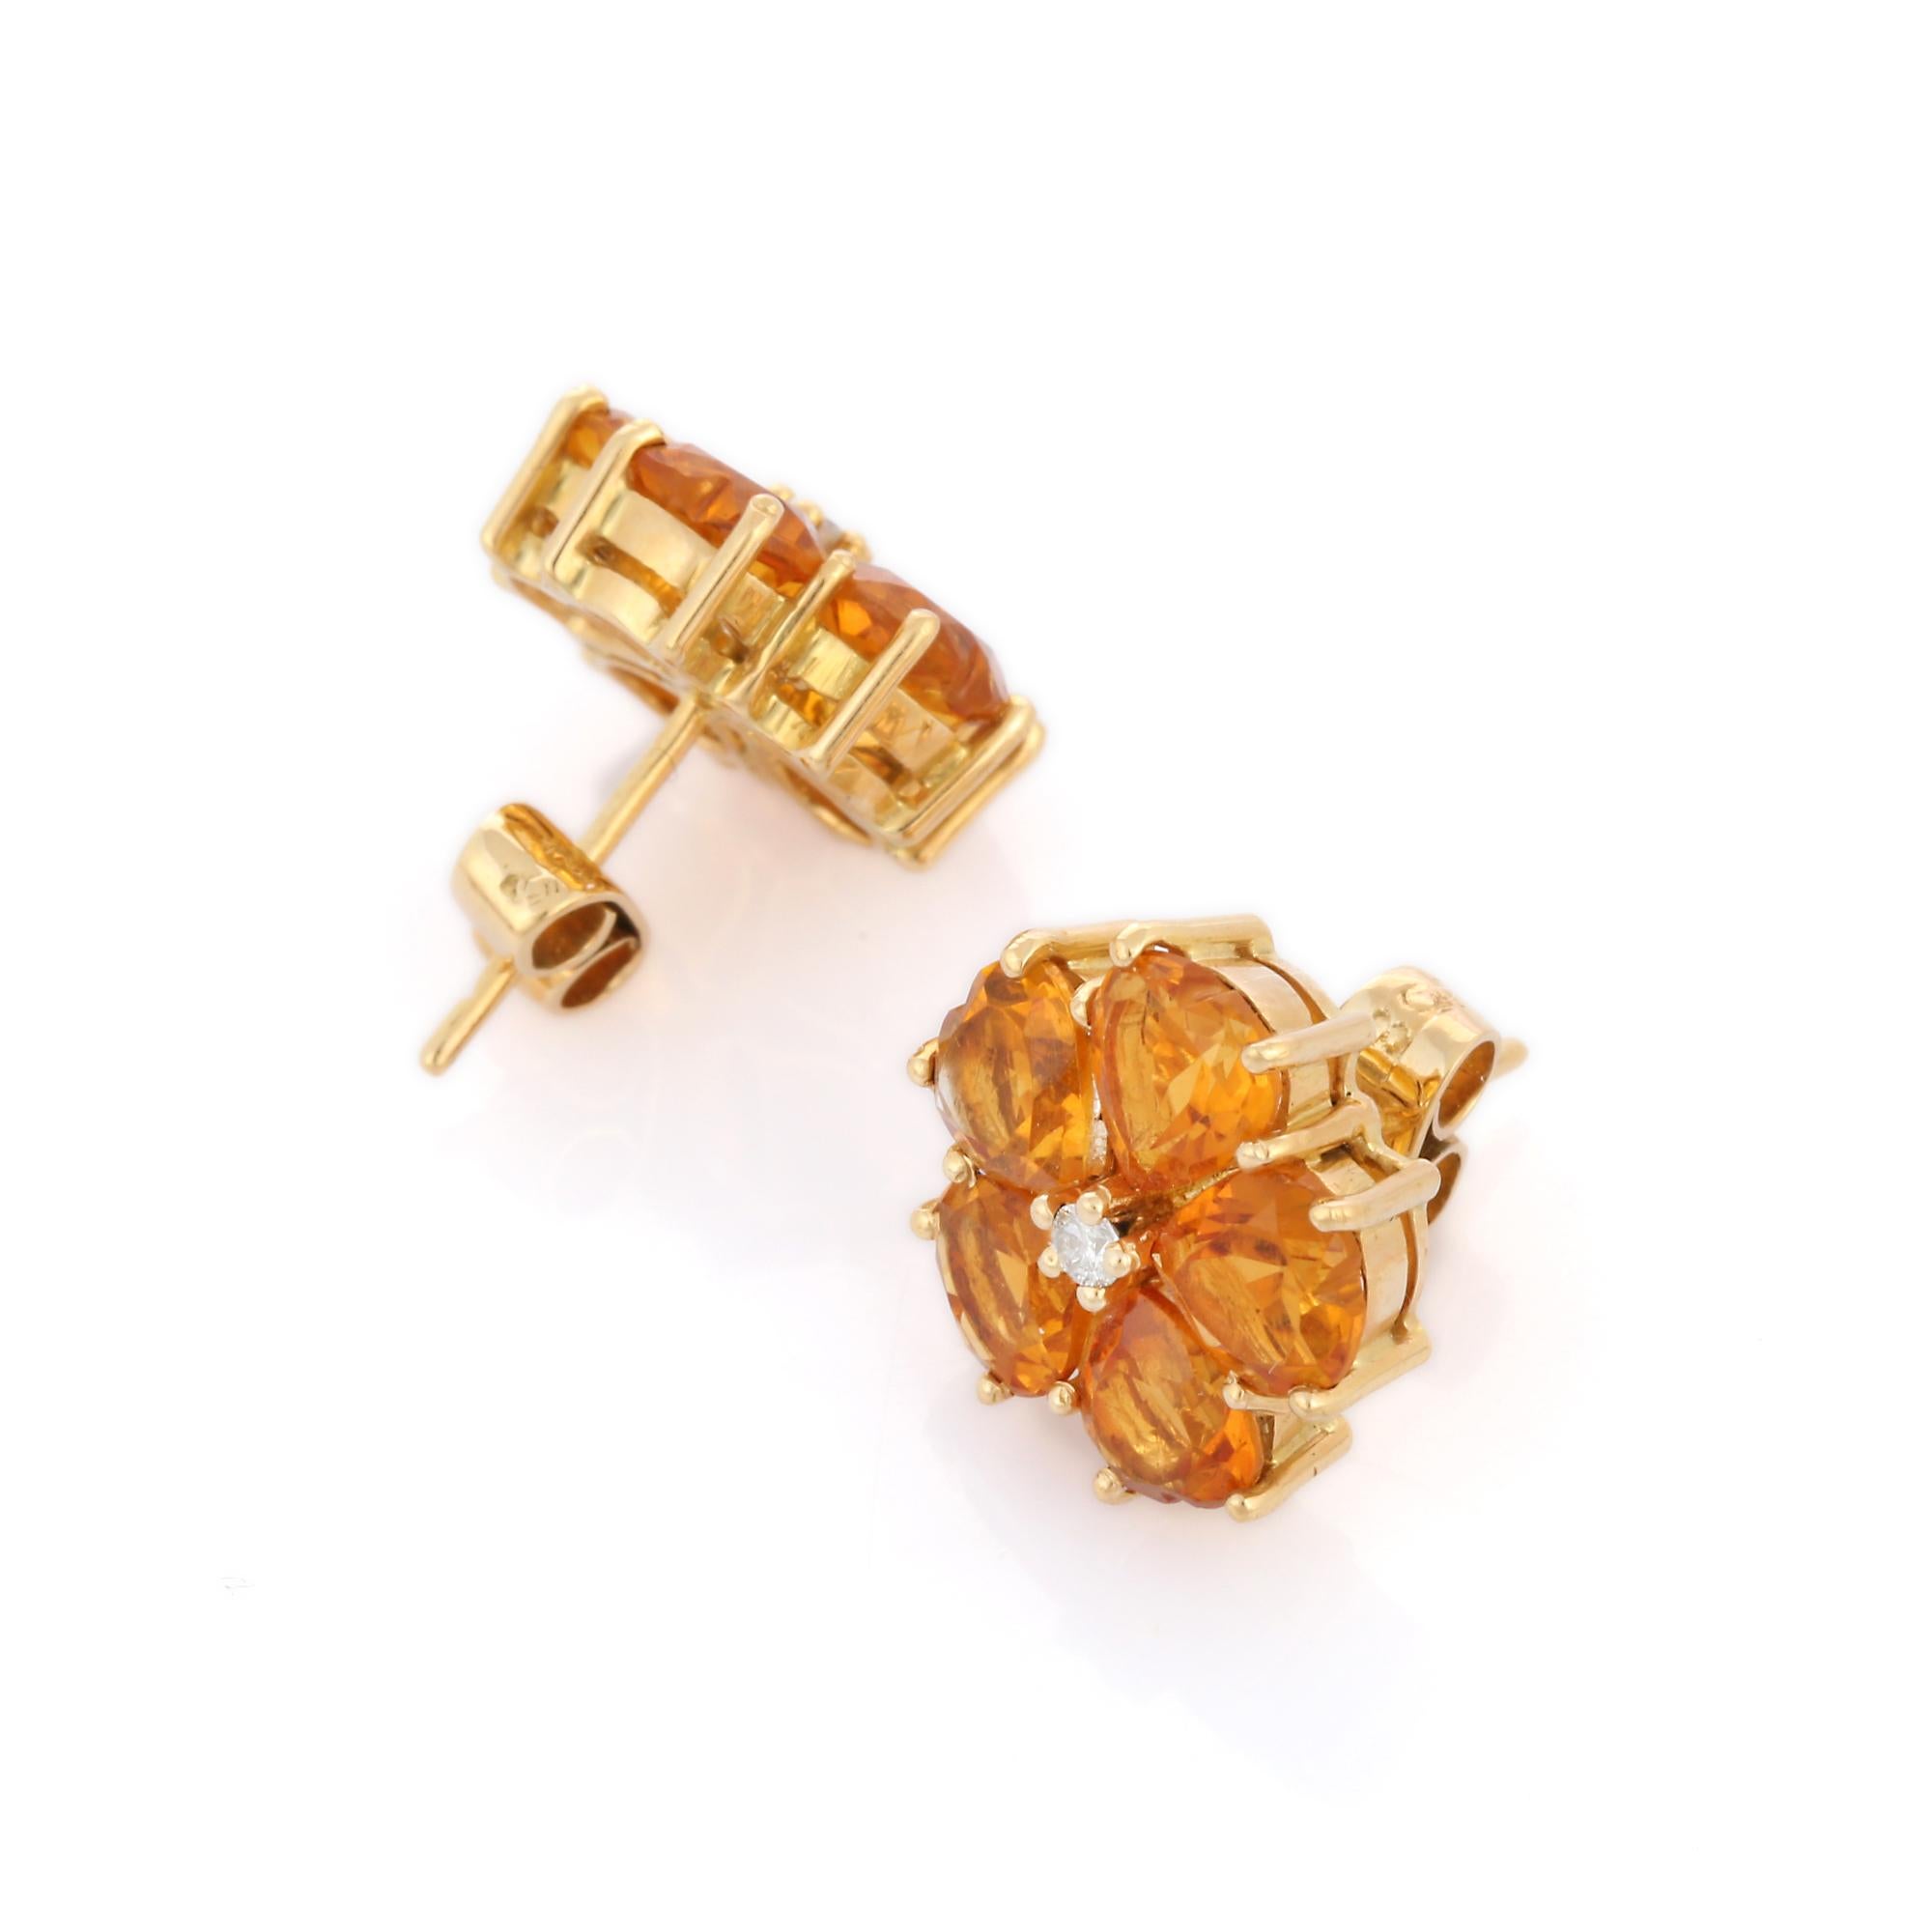 Heart Cut 6.5 ct Citrine Floral Stud Earrings with Diamonds in 18K Yellow Gold In New Condition For Sale In Houston, TX